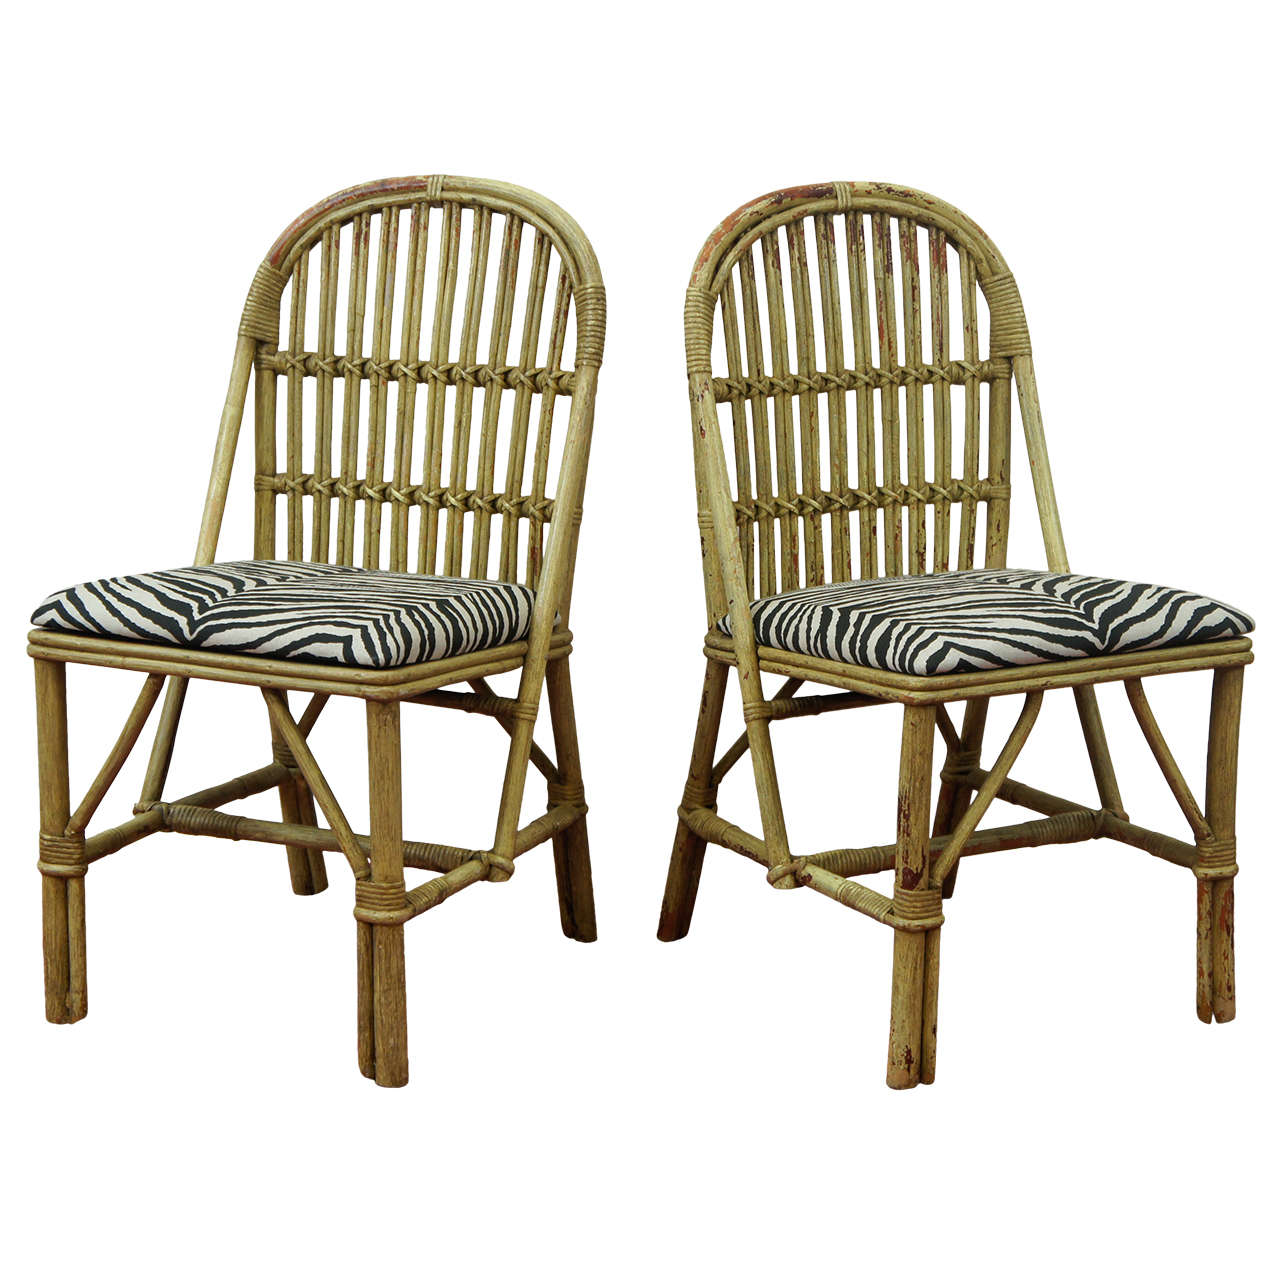 Bentwood Bamboo Chairs For Sale